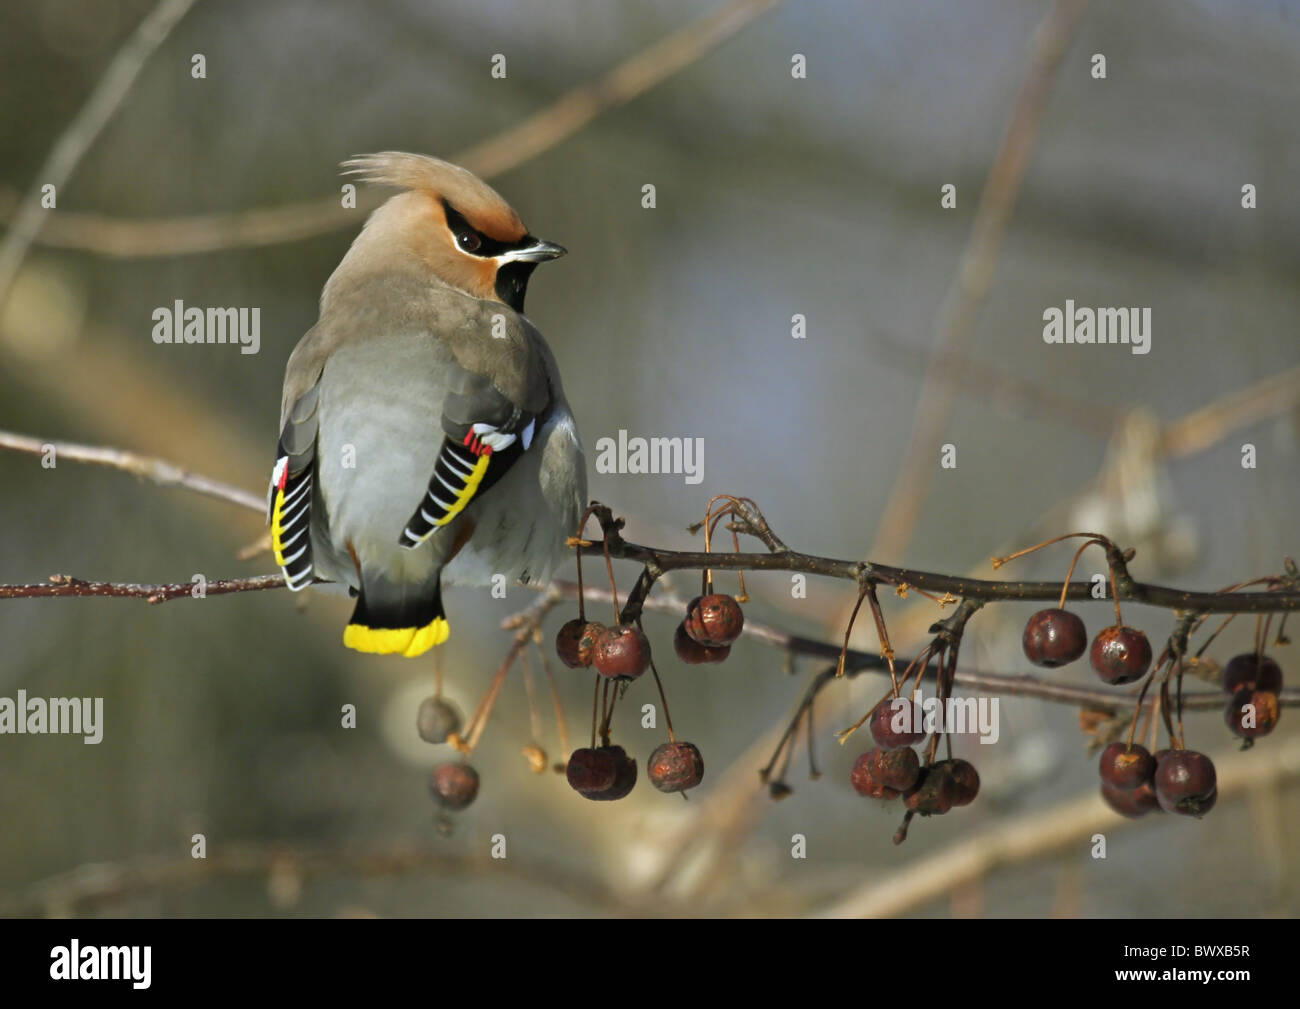 Bohemian Waxwing (Bombycilla garrulus) adult, perched on branch with fruit, Finland, march Stock Photo